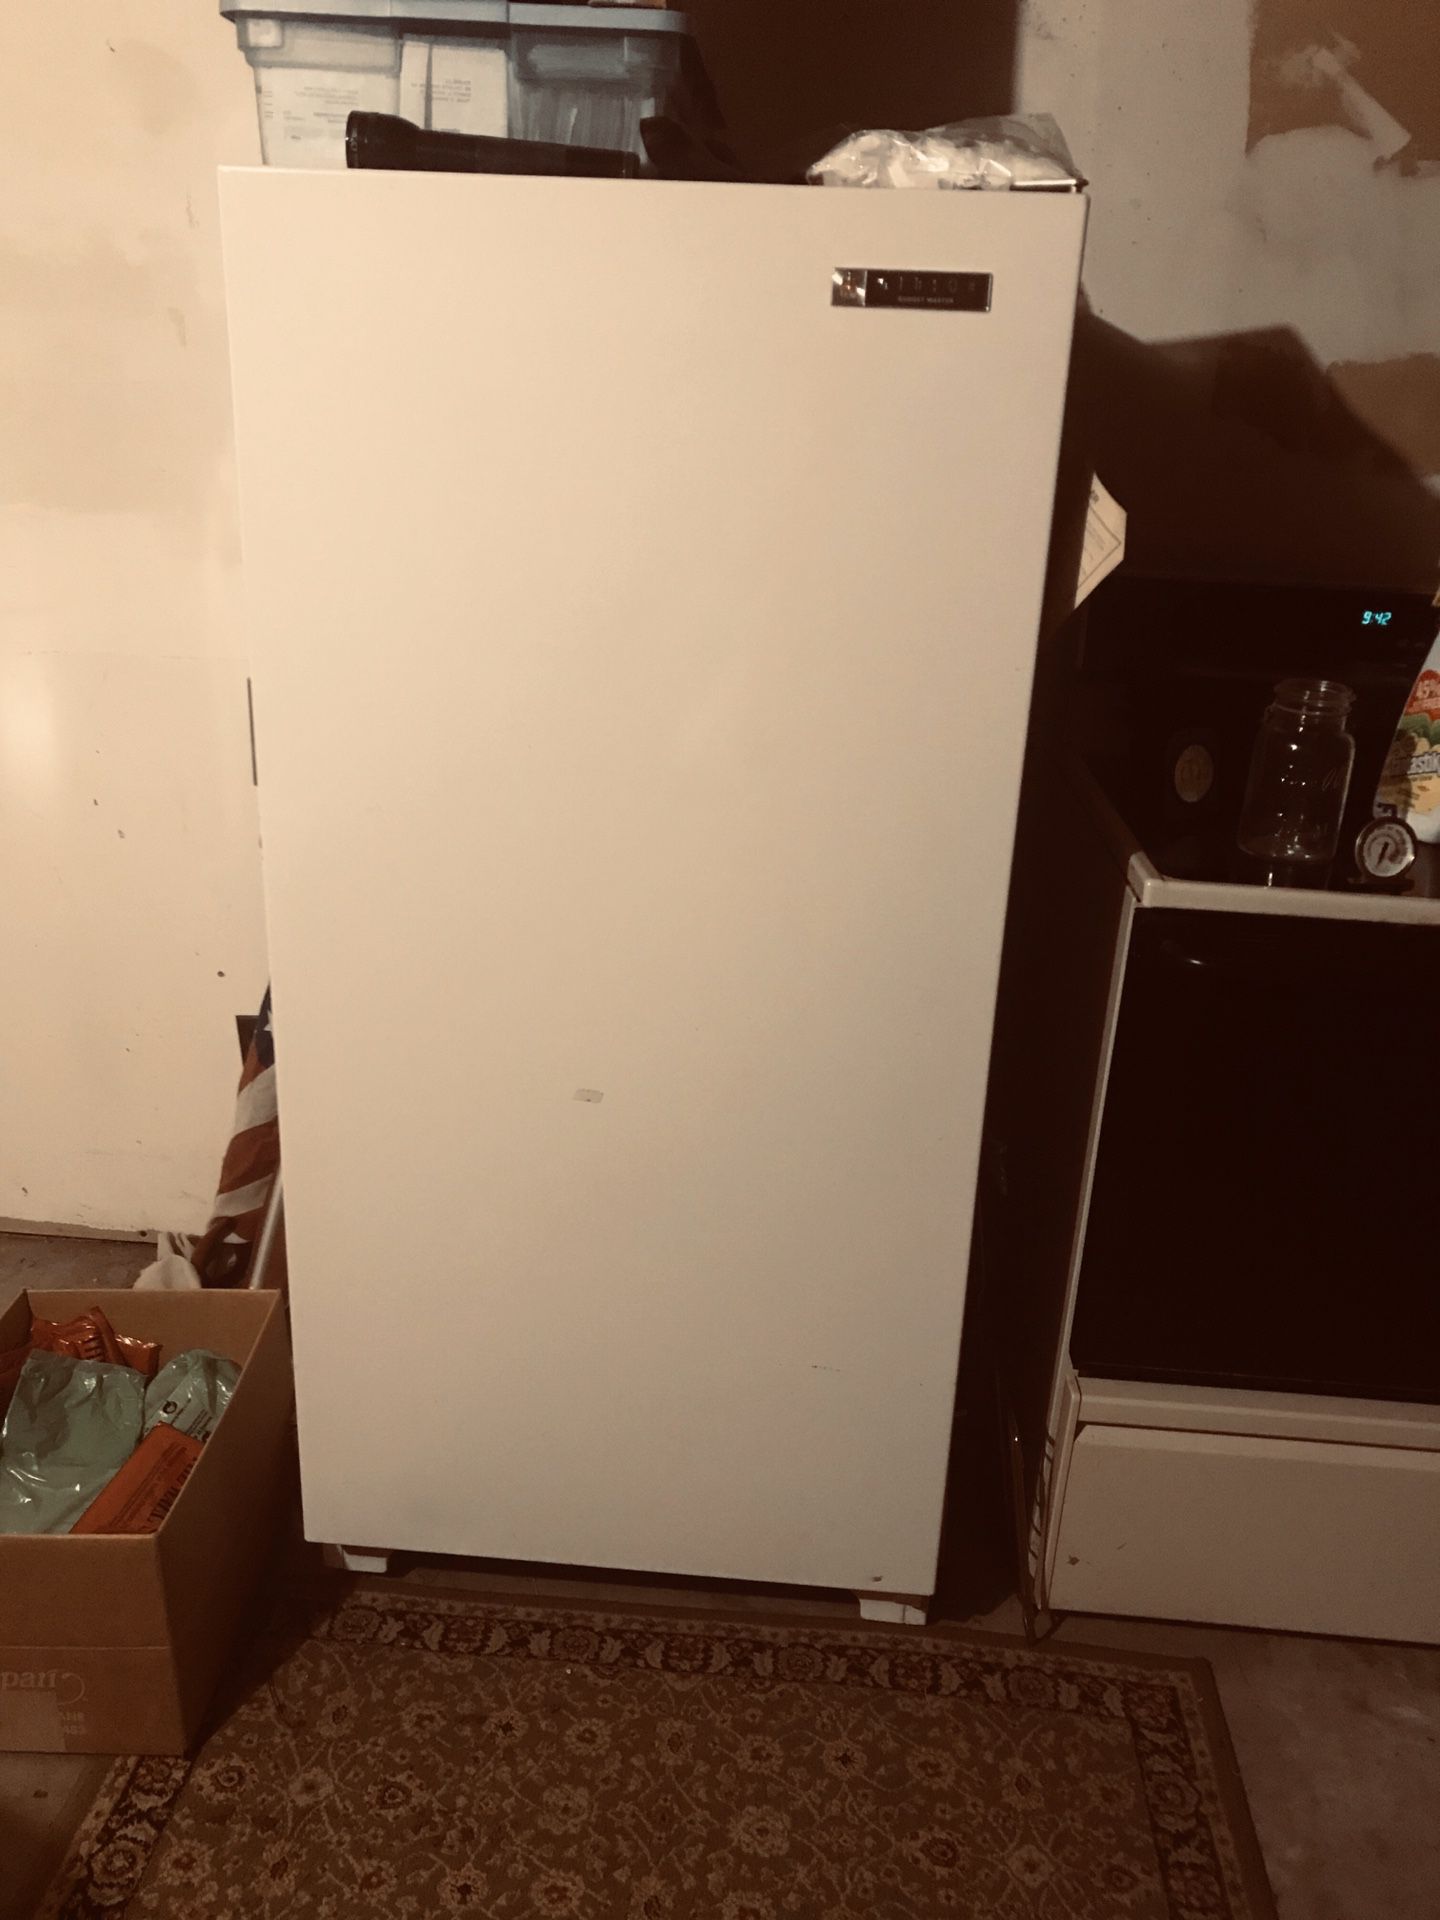 gibson freezer with a lot of meat inside, free delivery